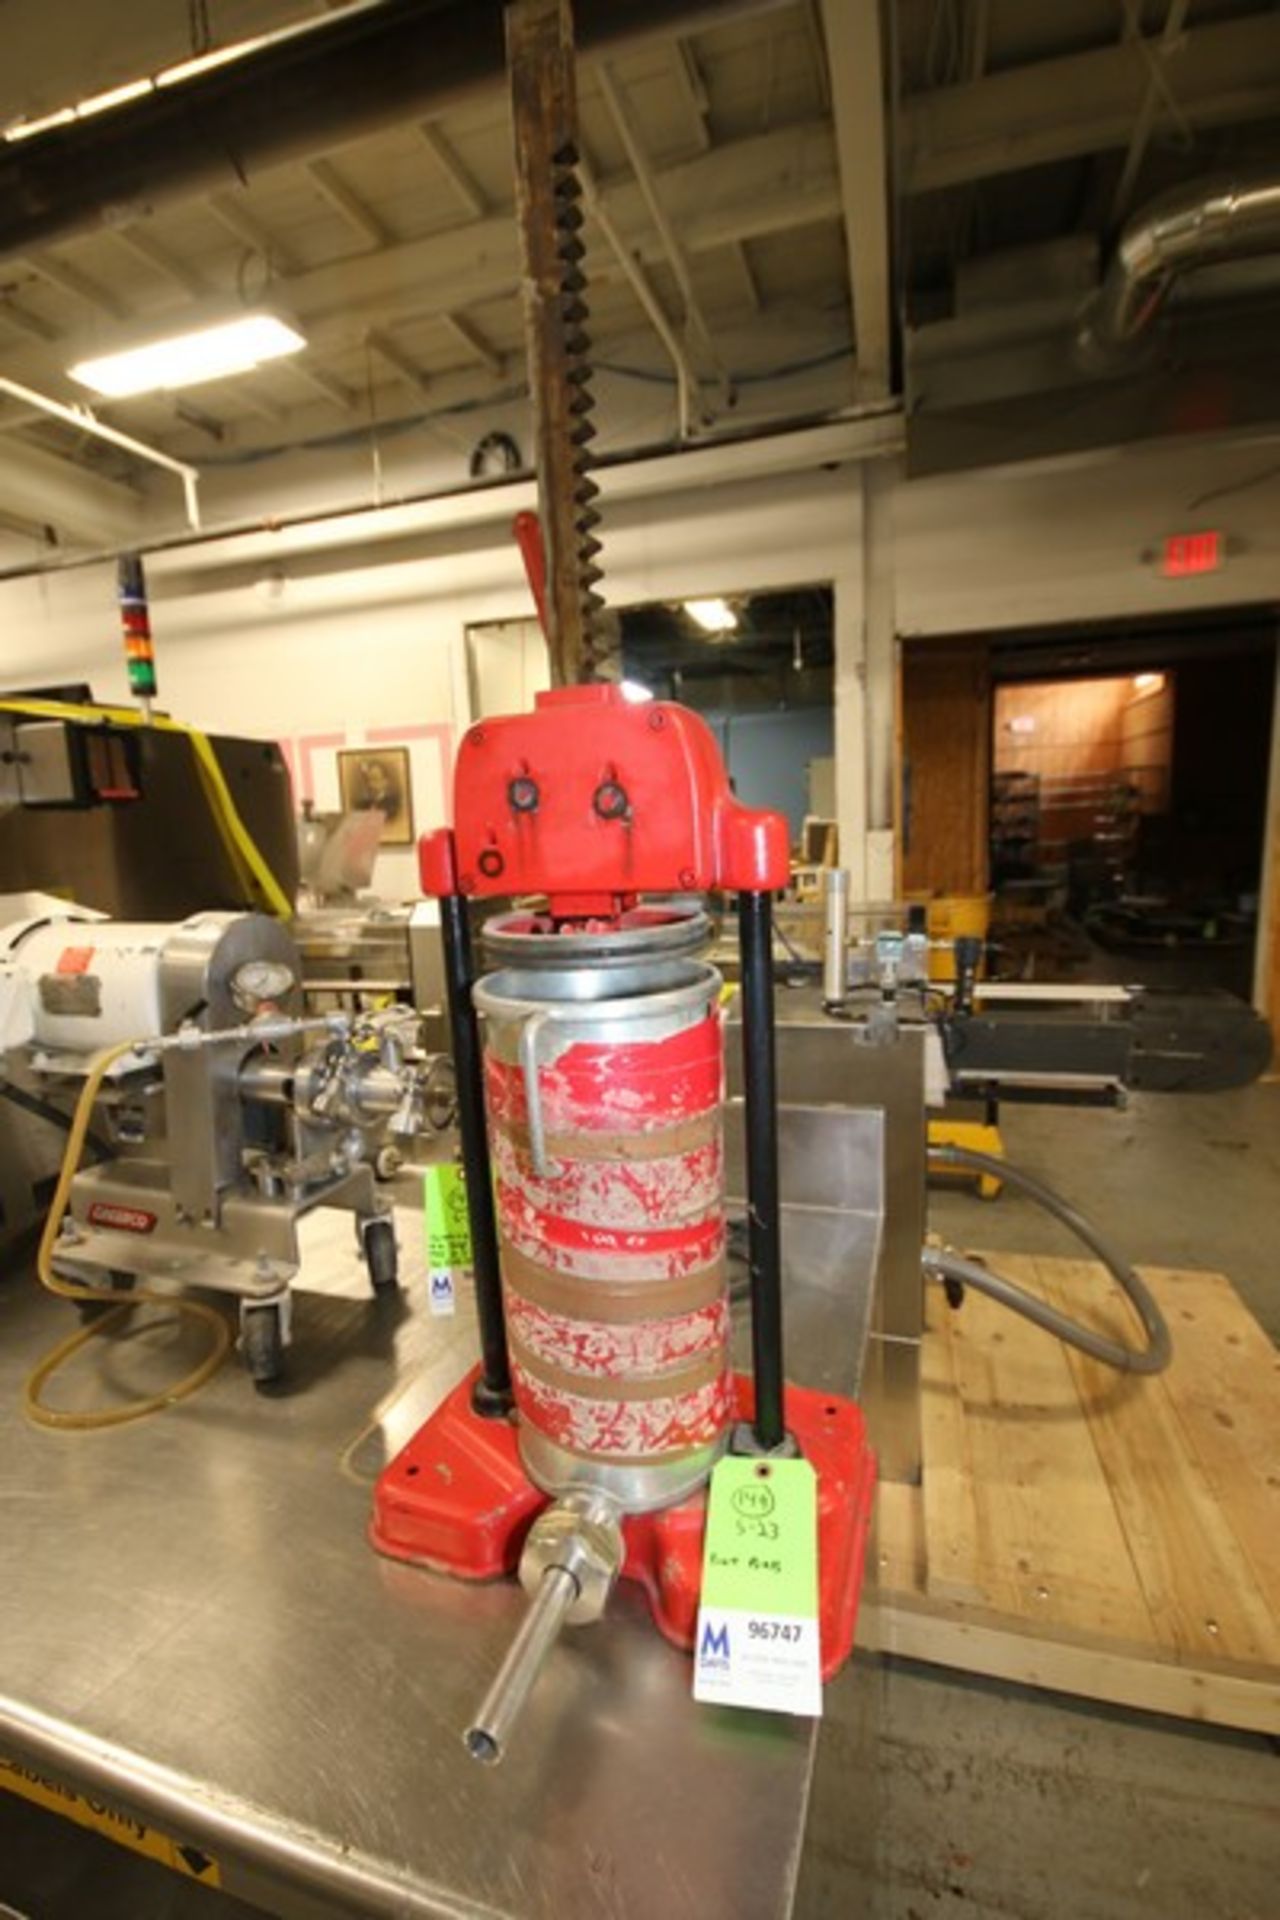 Lab Fruit Press (INV#96747) (Located @ the MDG Auction Showroom in Pgh., PA)(Loading, Handling and